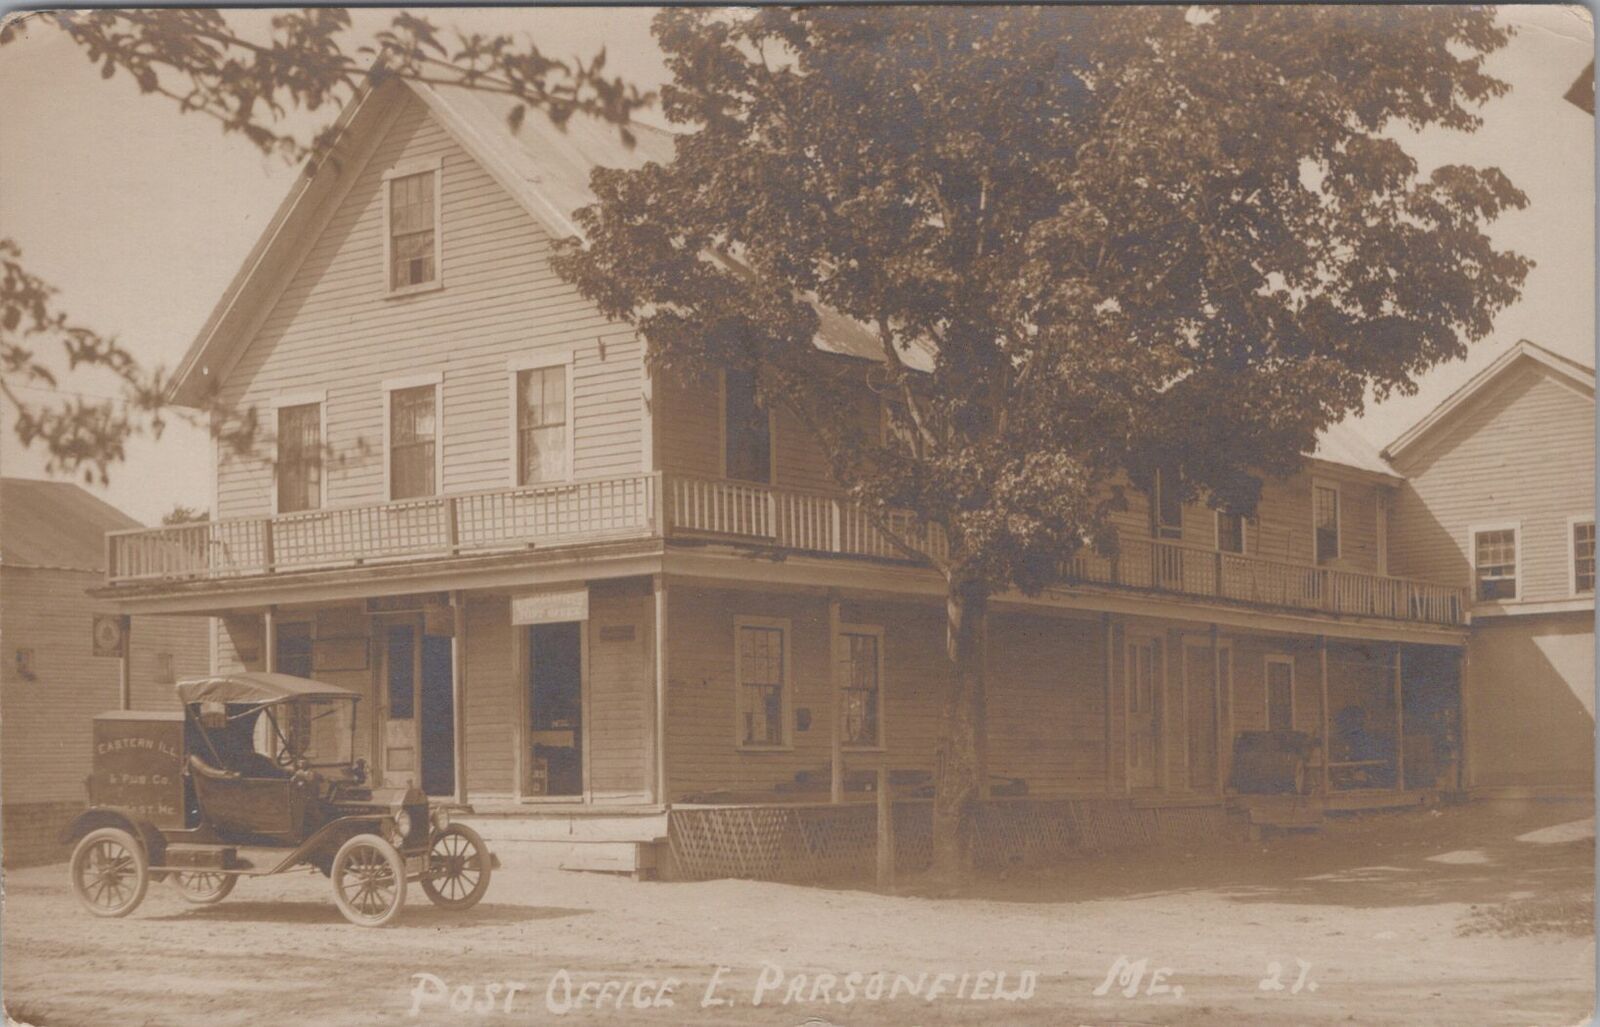 Post Office Store Old Car East Parsonsfield Maine 1915 RPPC Photo Postcard